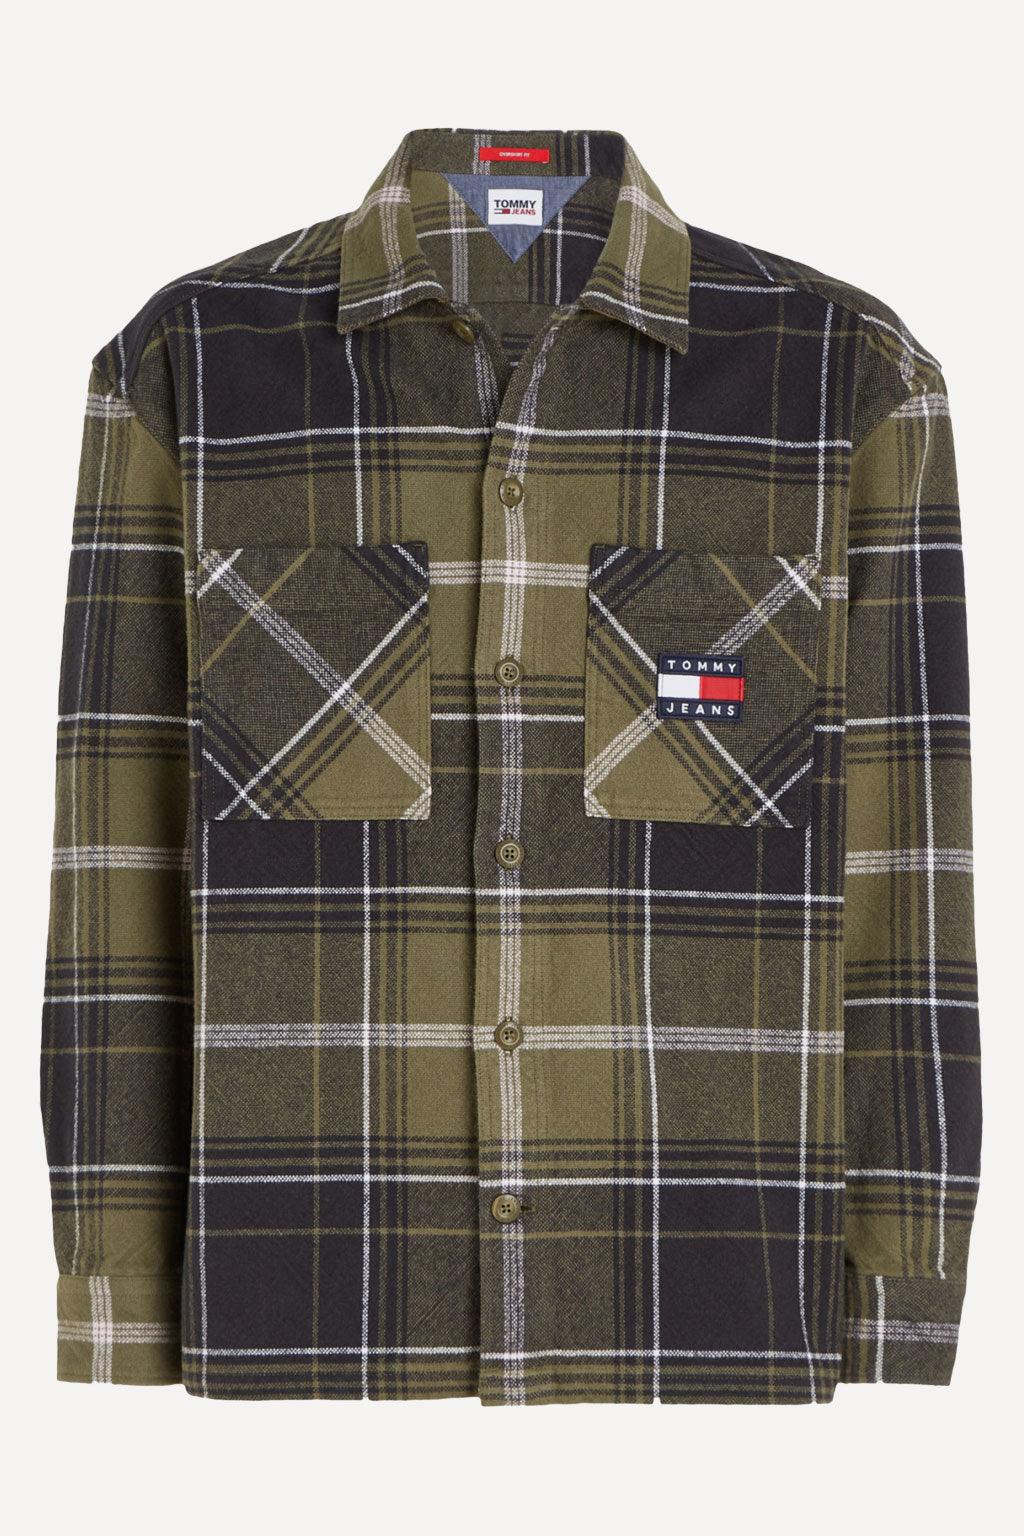 Tommy Jeans overshirt - Big Boss | the menswear concept